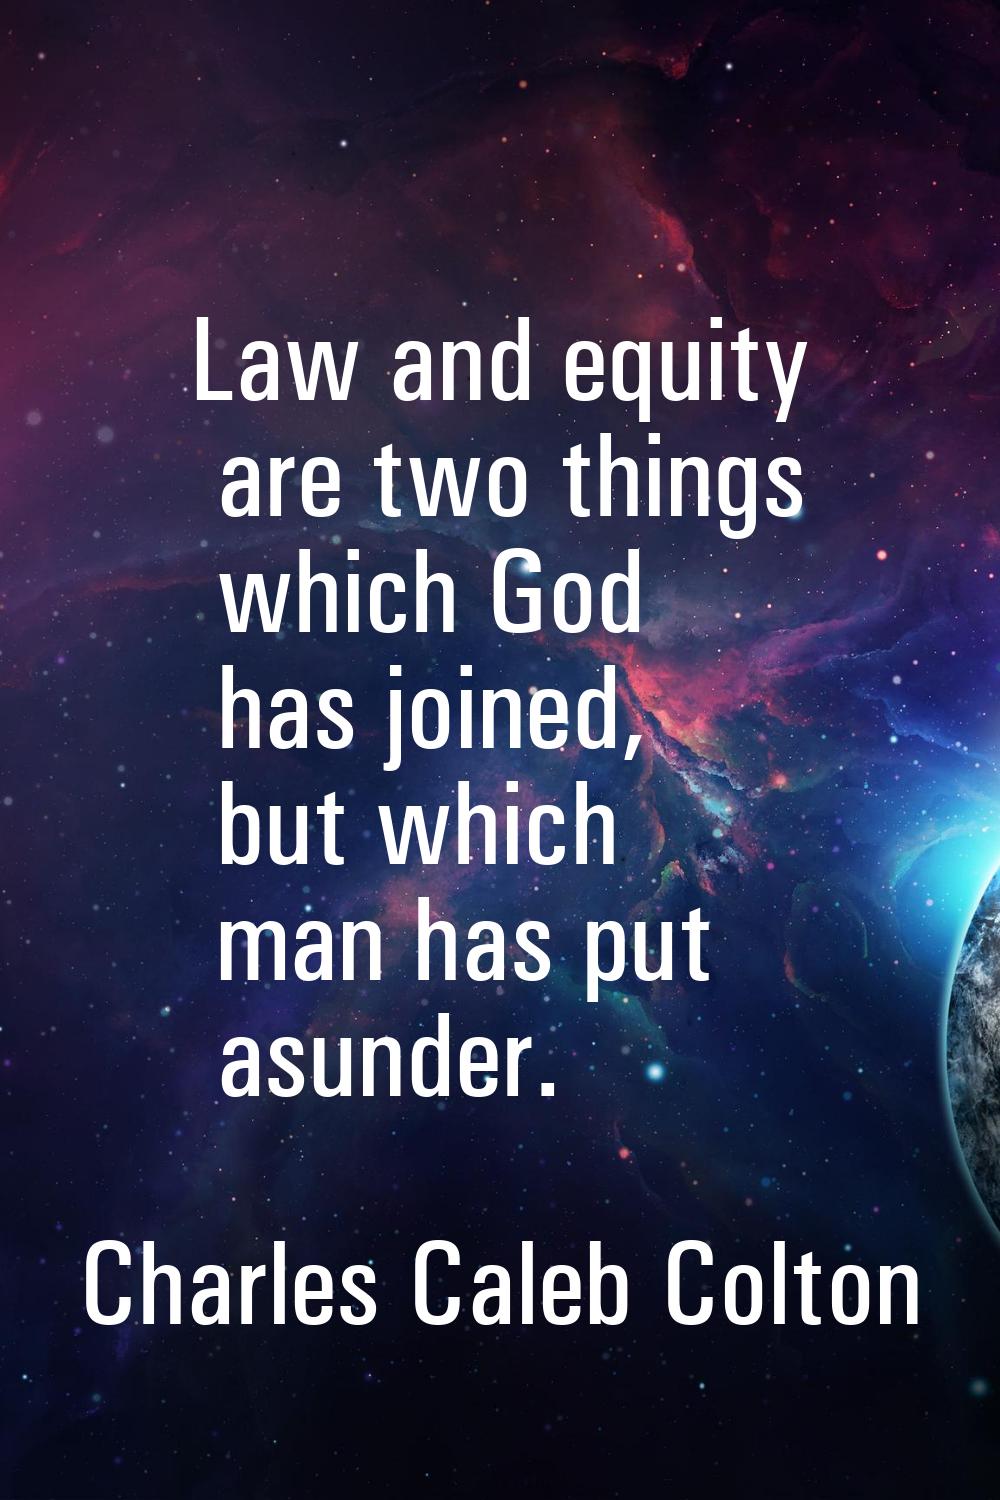 Law and equity are two things which God has joined, but which man has put asunder.